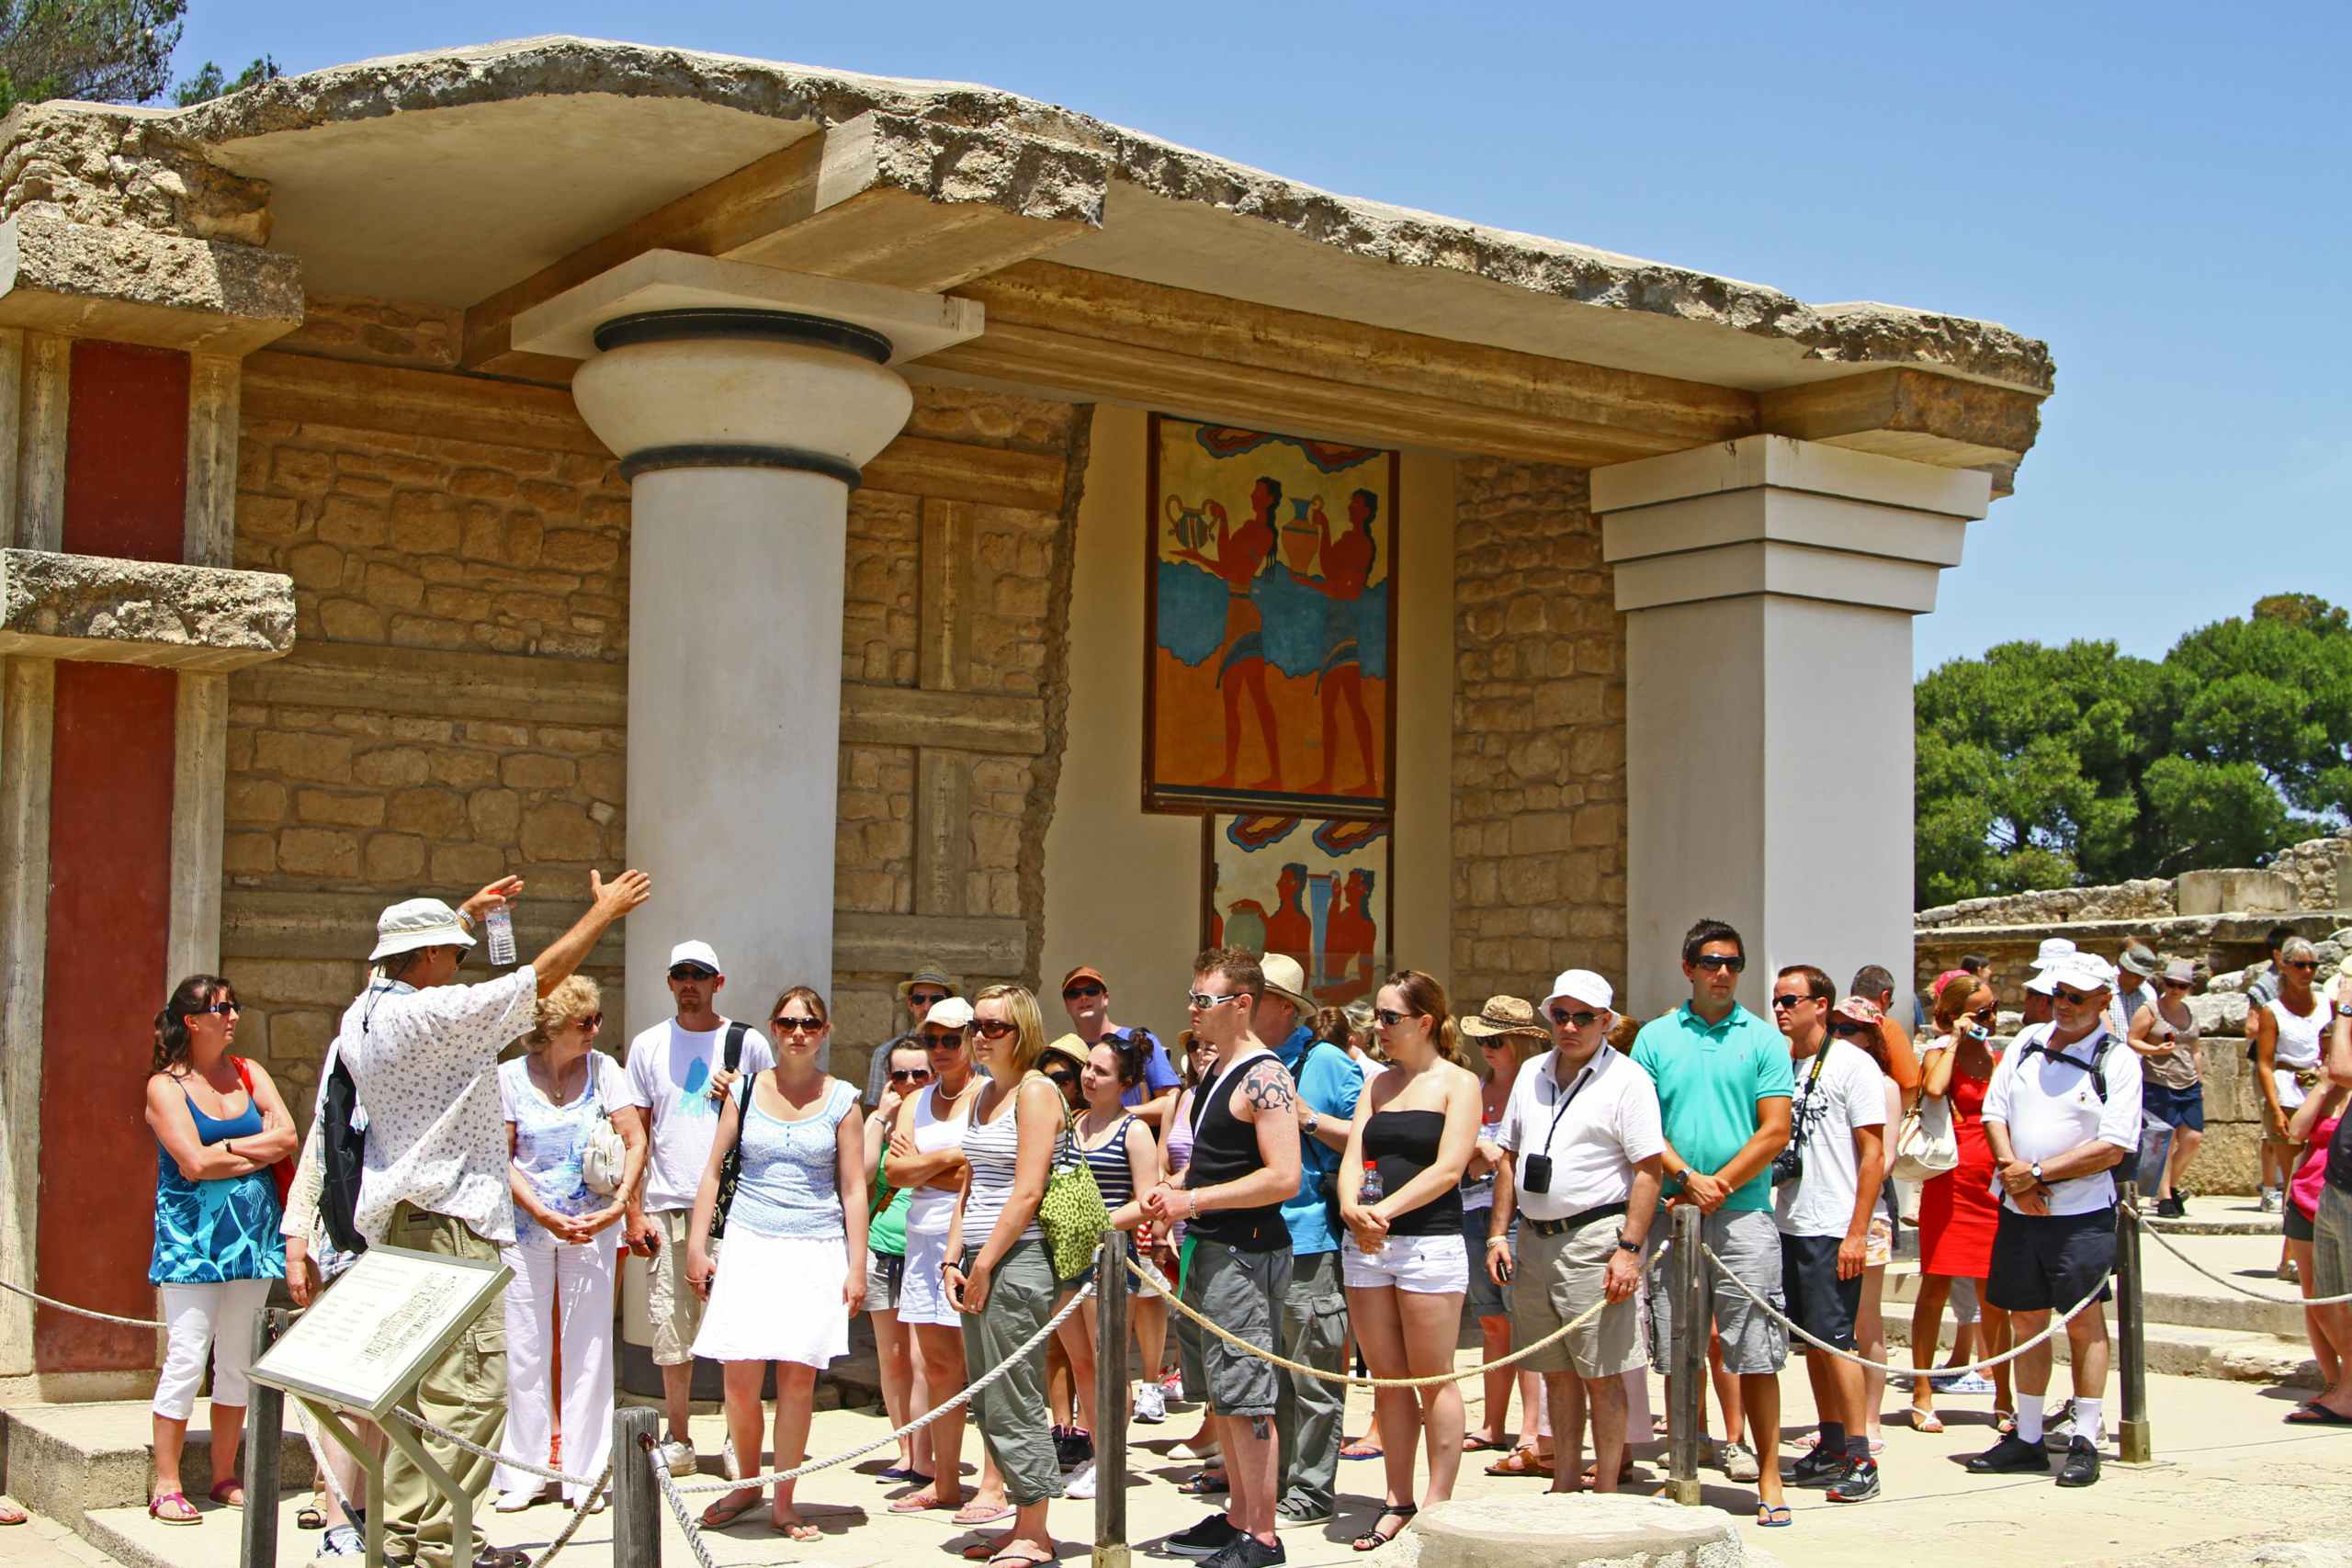 Tour group gathered at a Greek temple